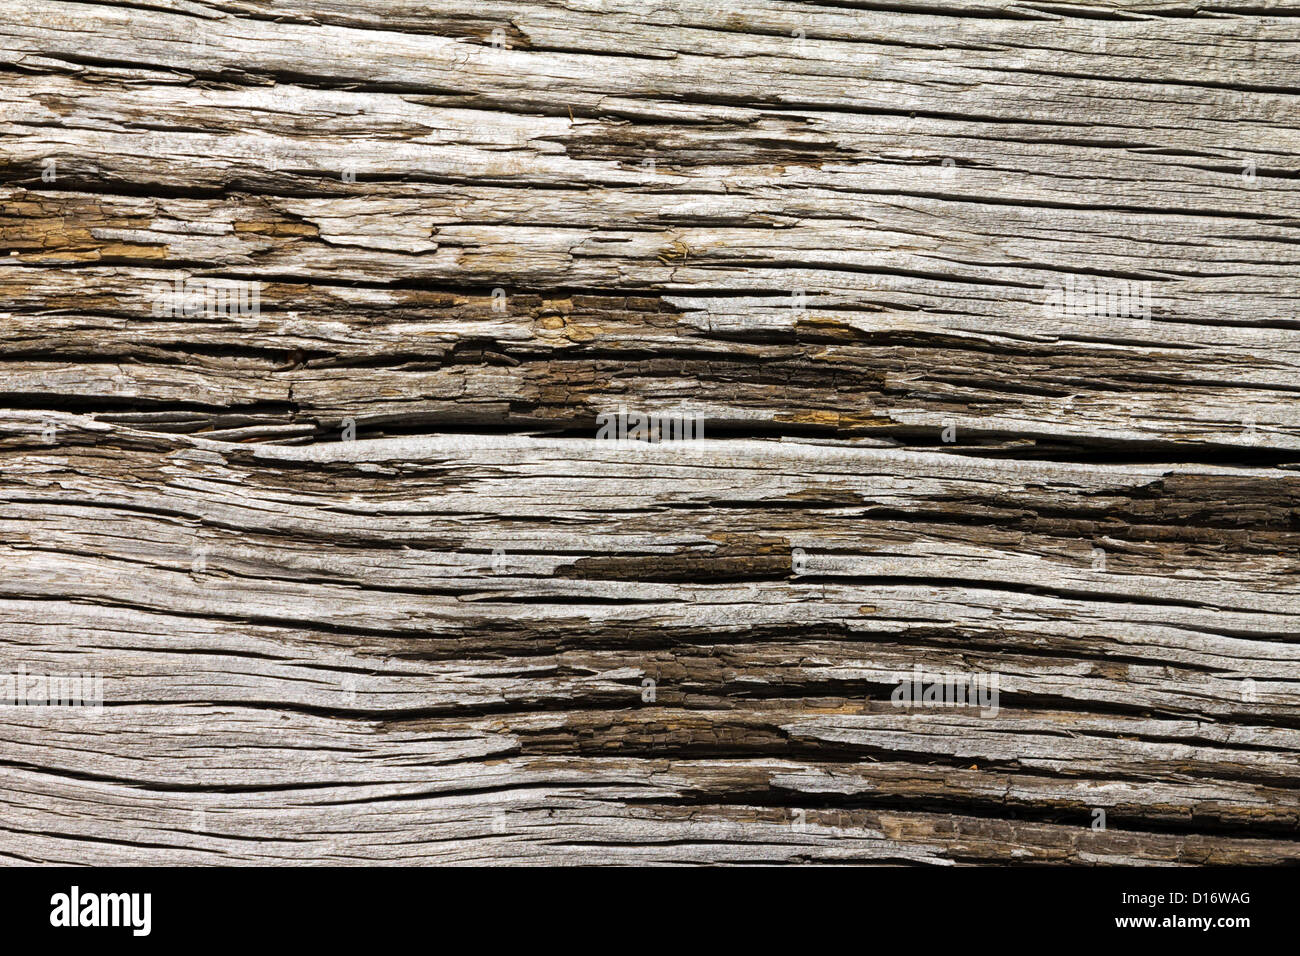 Decaying Wooden Old Textured Background Stock Photo